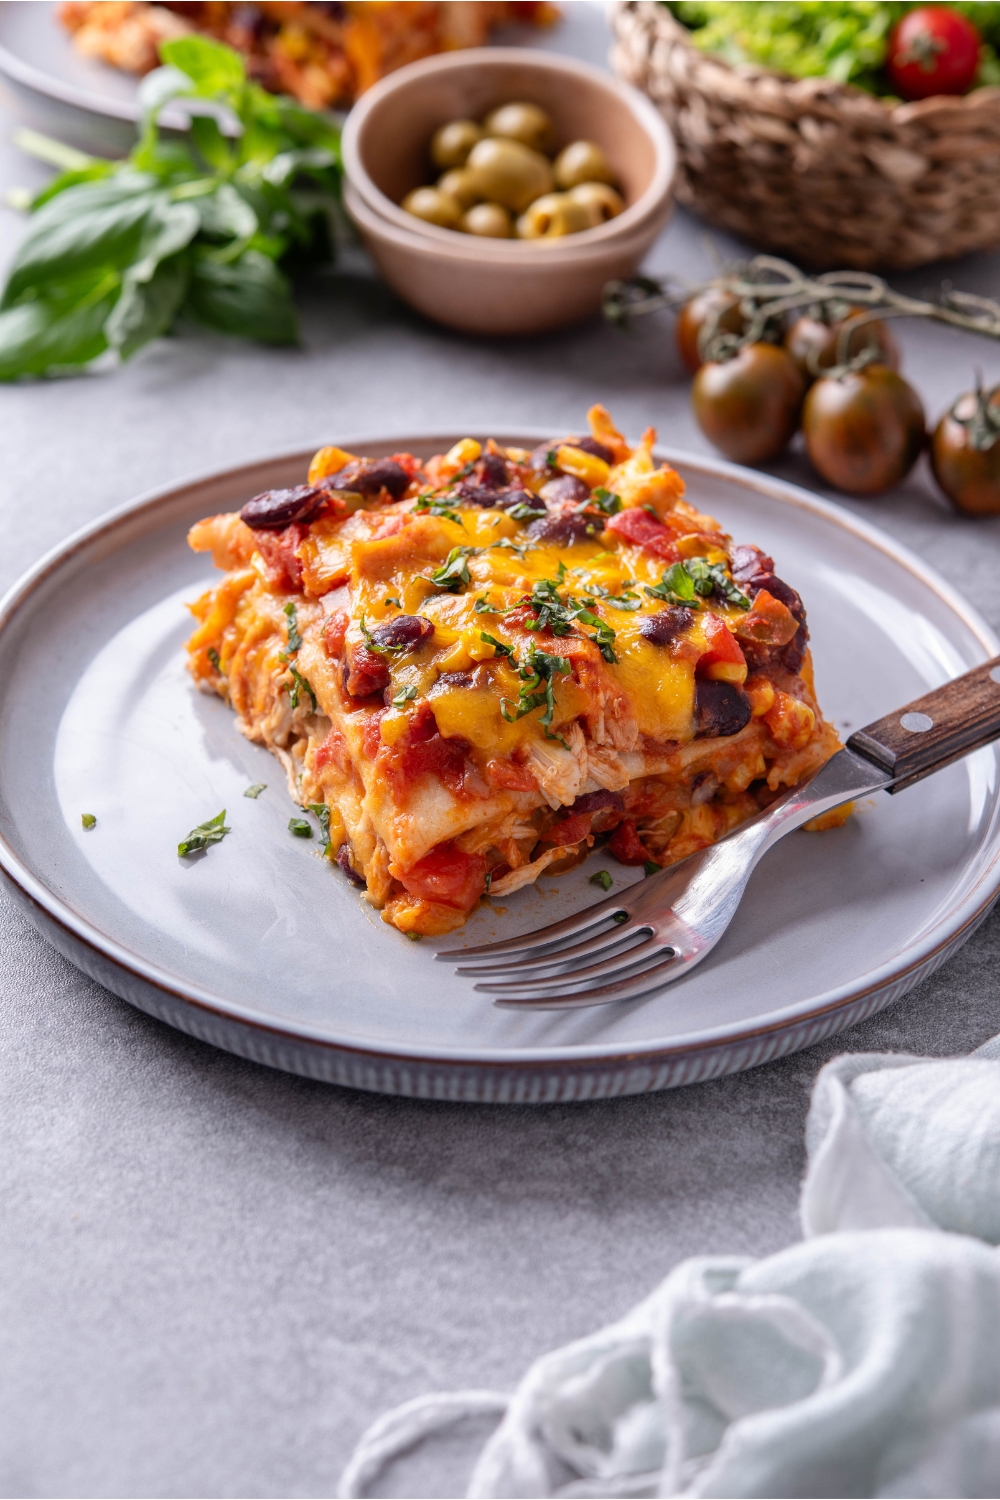 A square serving of chicken tortilla casserole layered with tomato sauce, shredded chicken, black beans, and topped with melted cheese, and fresh green herbs.